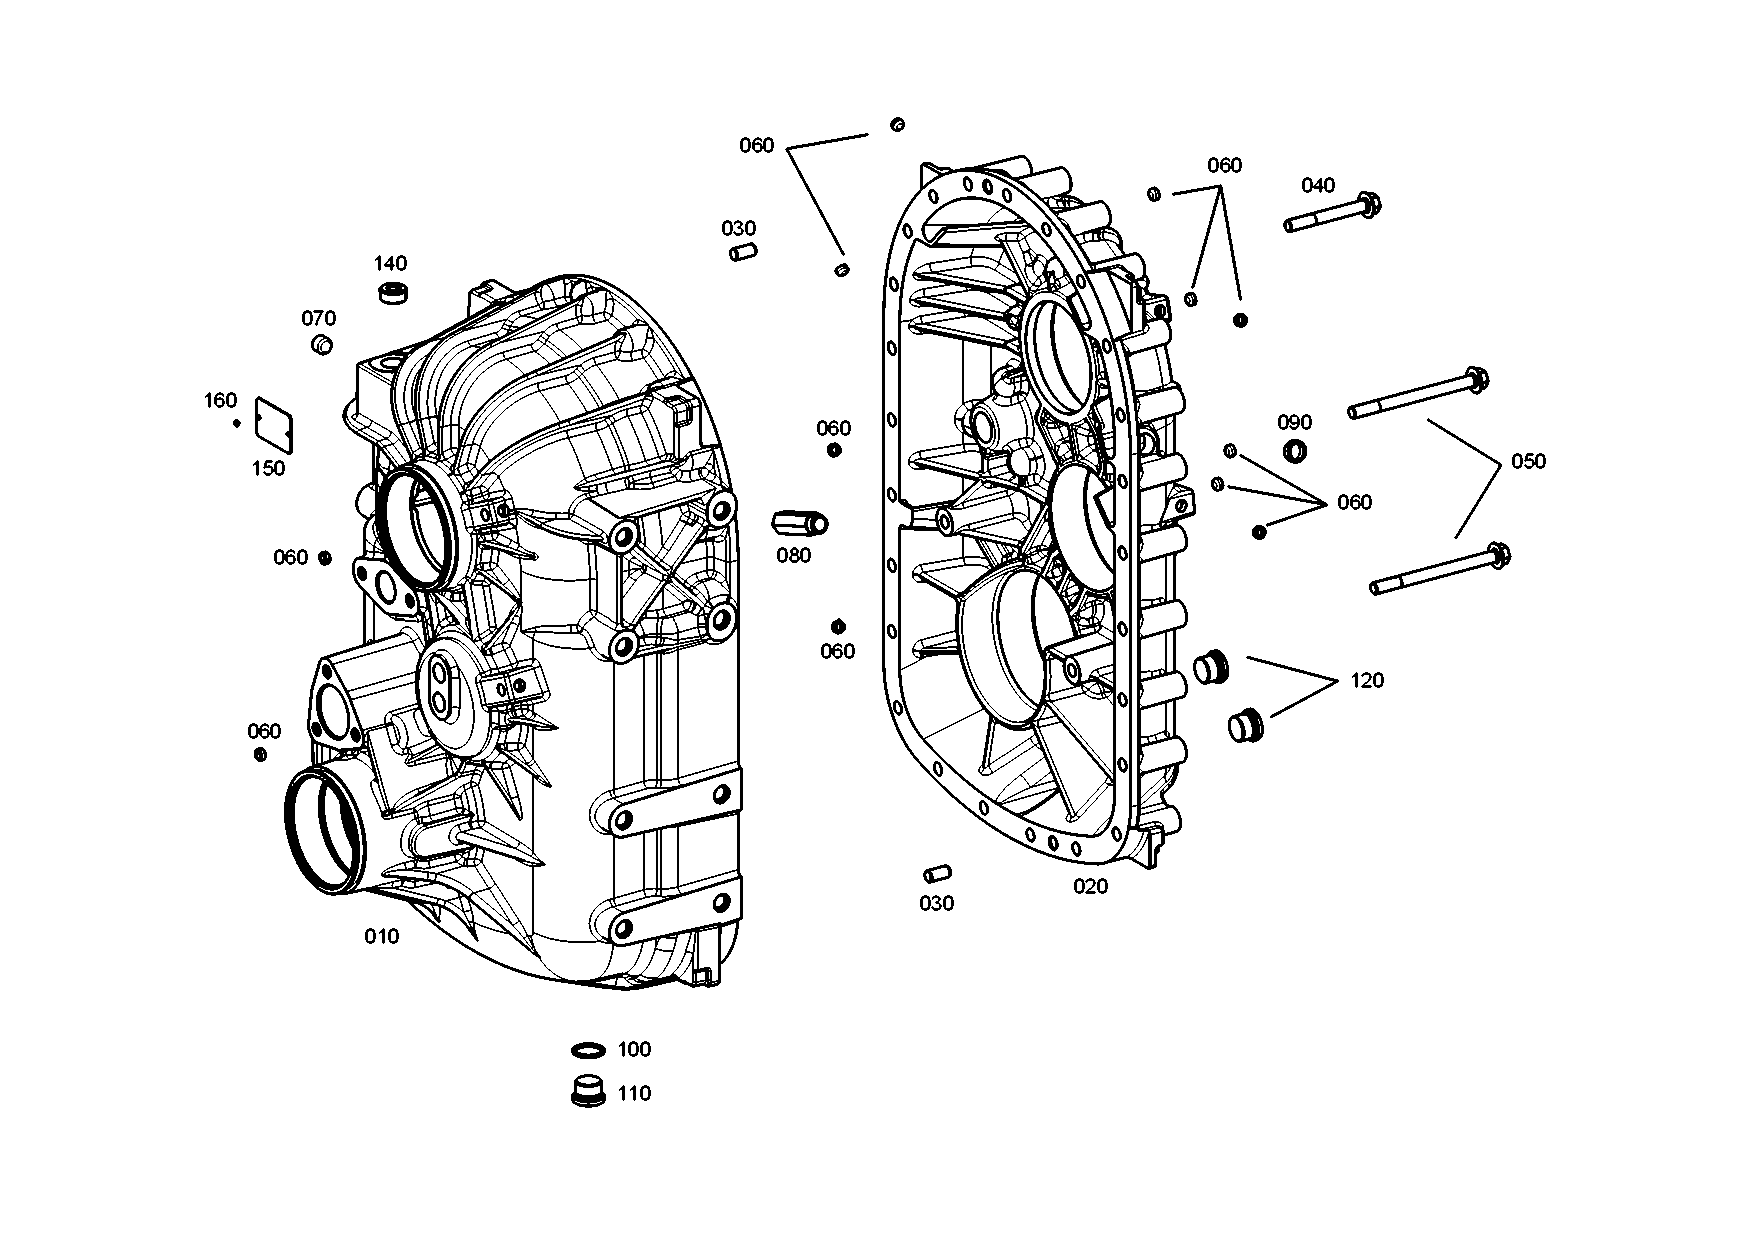 drawing for MARMON Herring MVG751002 - HOUSING REAR SECTION (figure 3)